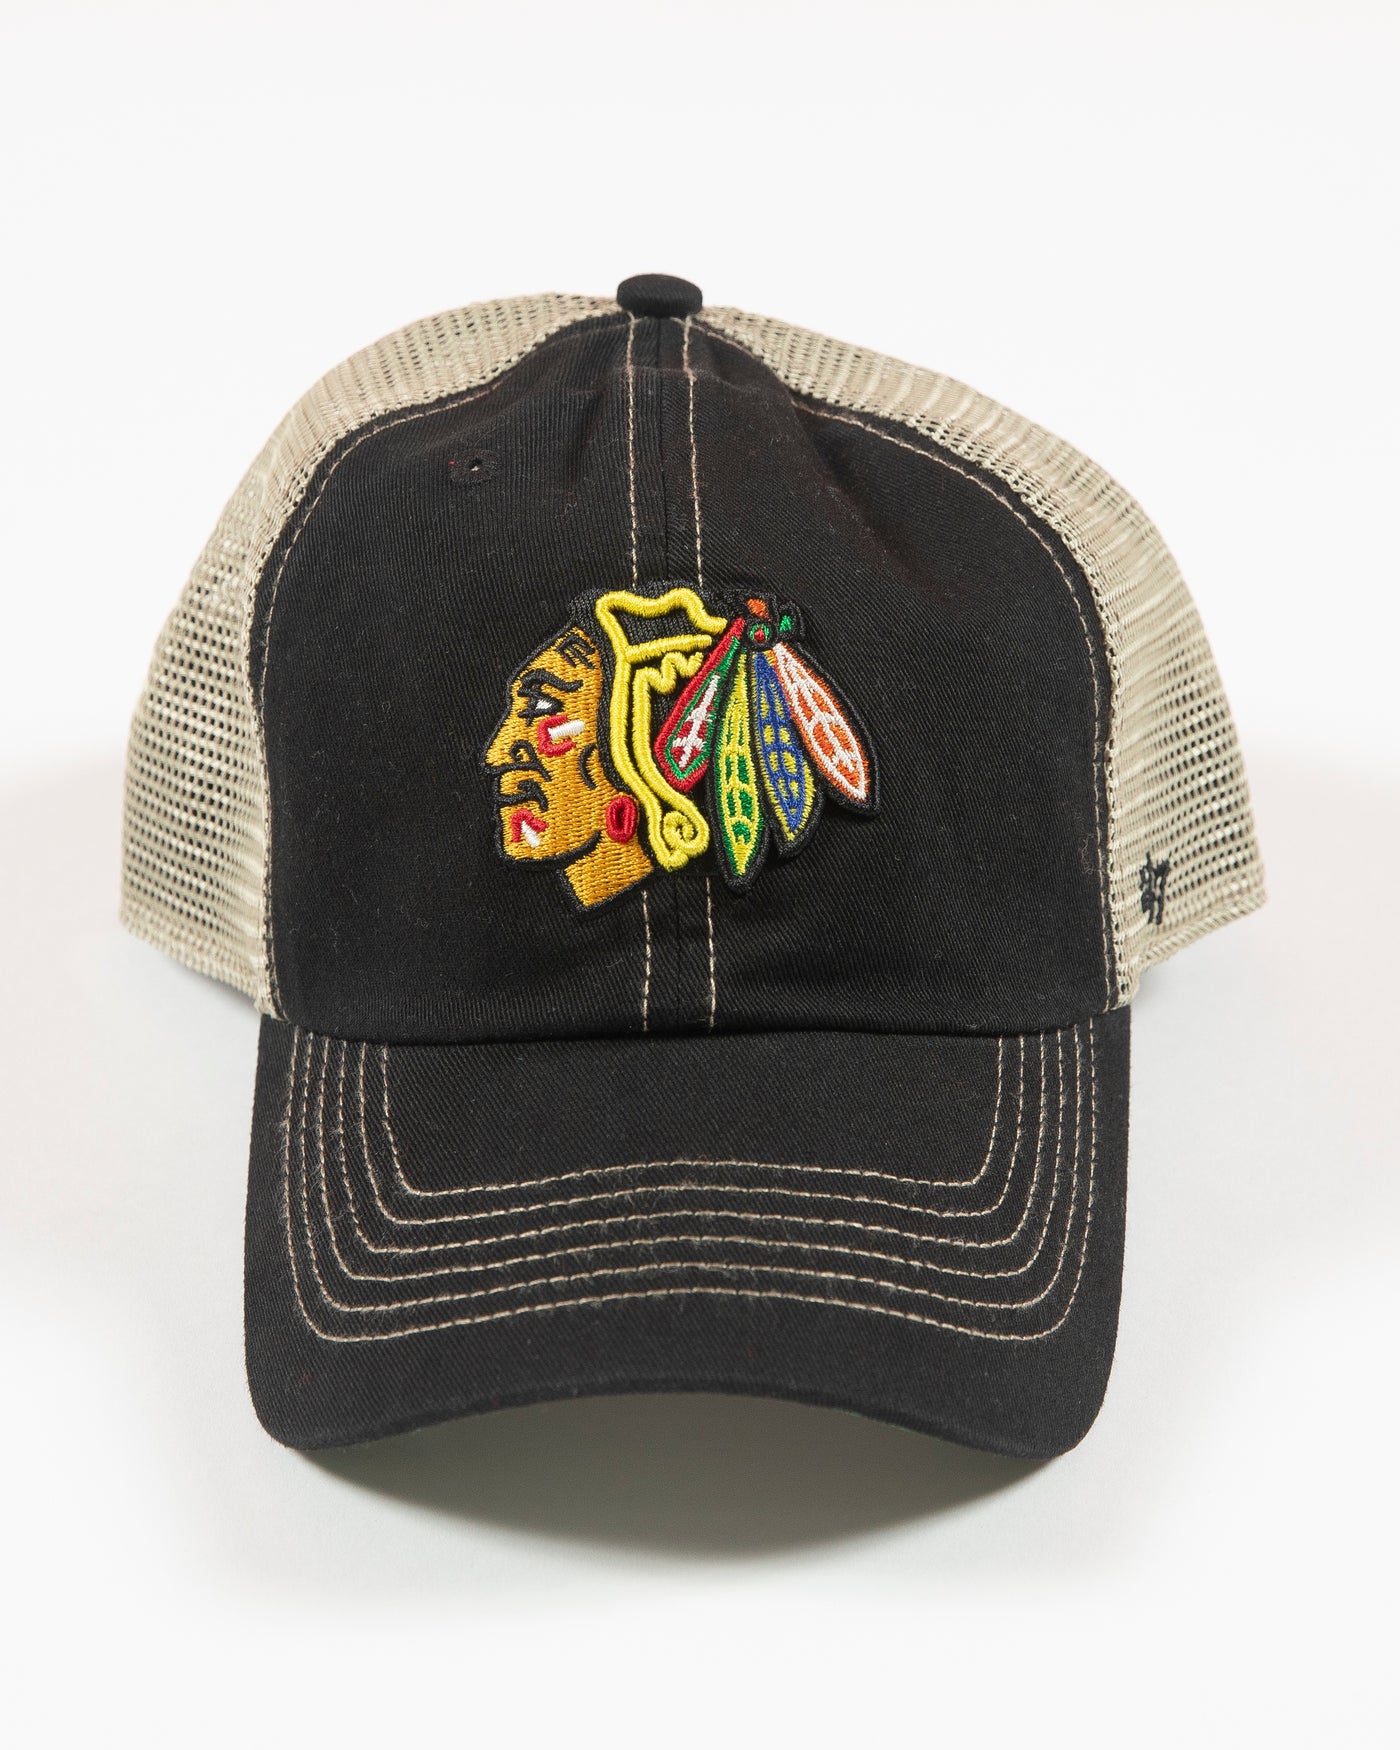 '47 adjustable clean up cap with Chicago Blackhawks primary logo embroidered on front in an all over black and tan colorway - front lay flat